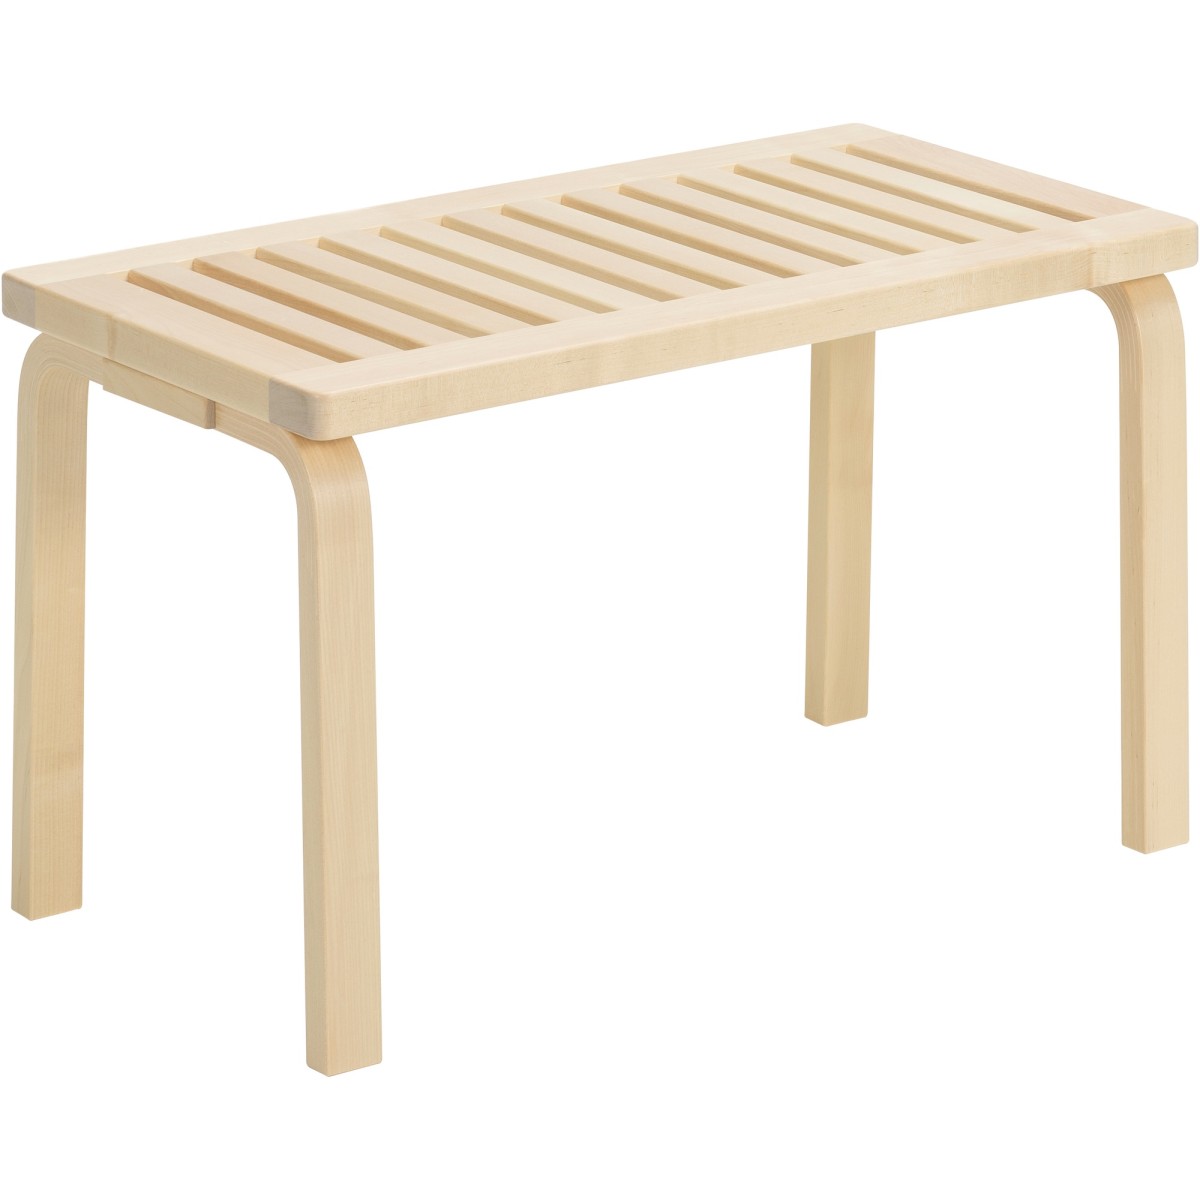 153B bench – Slatted seat – Natural lacquered birch